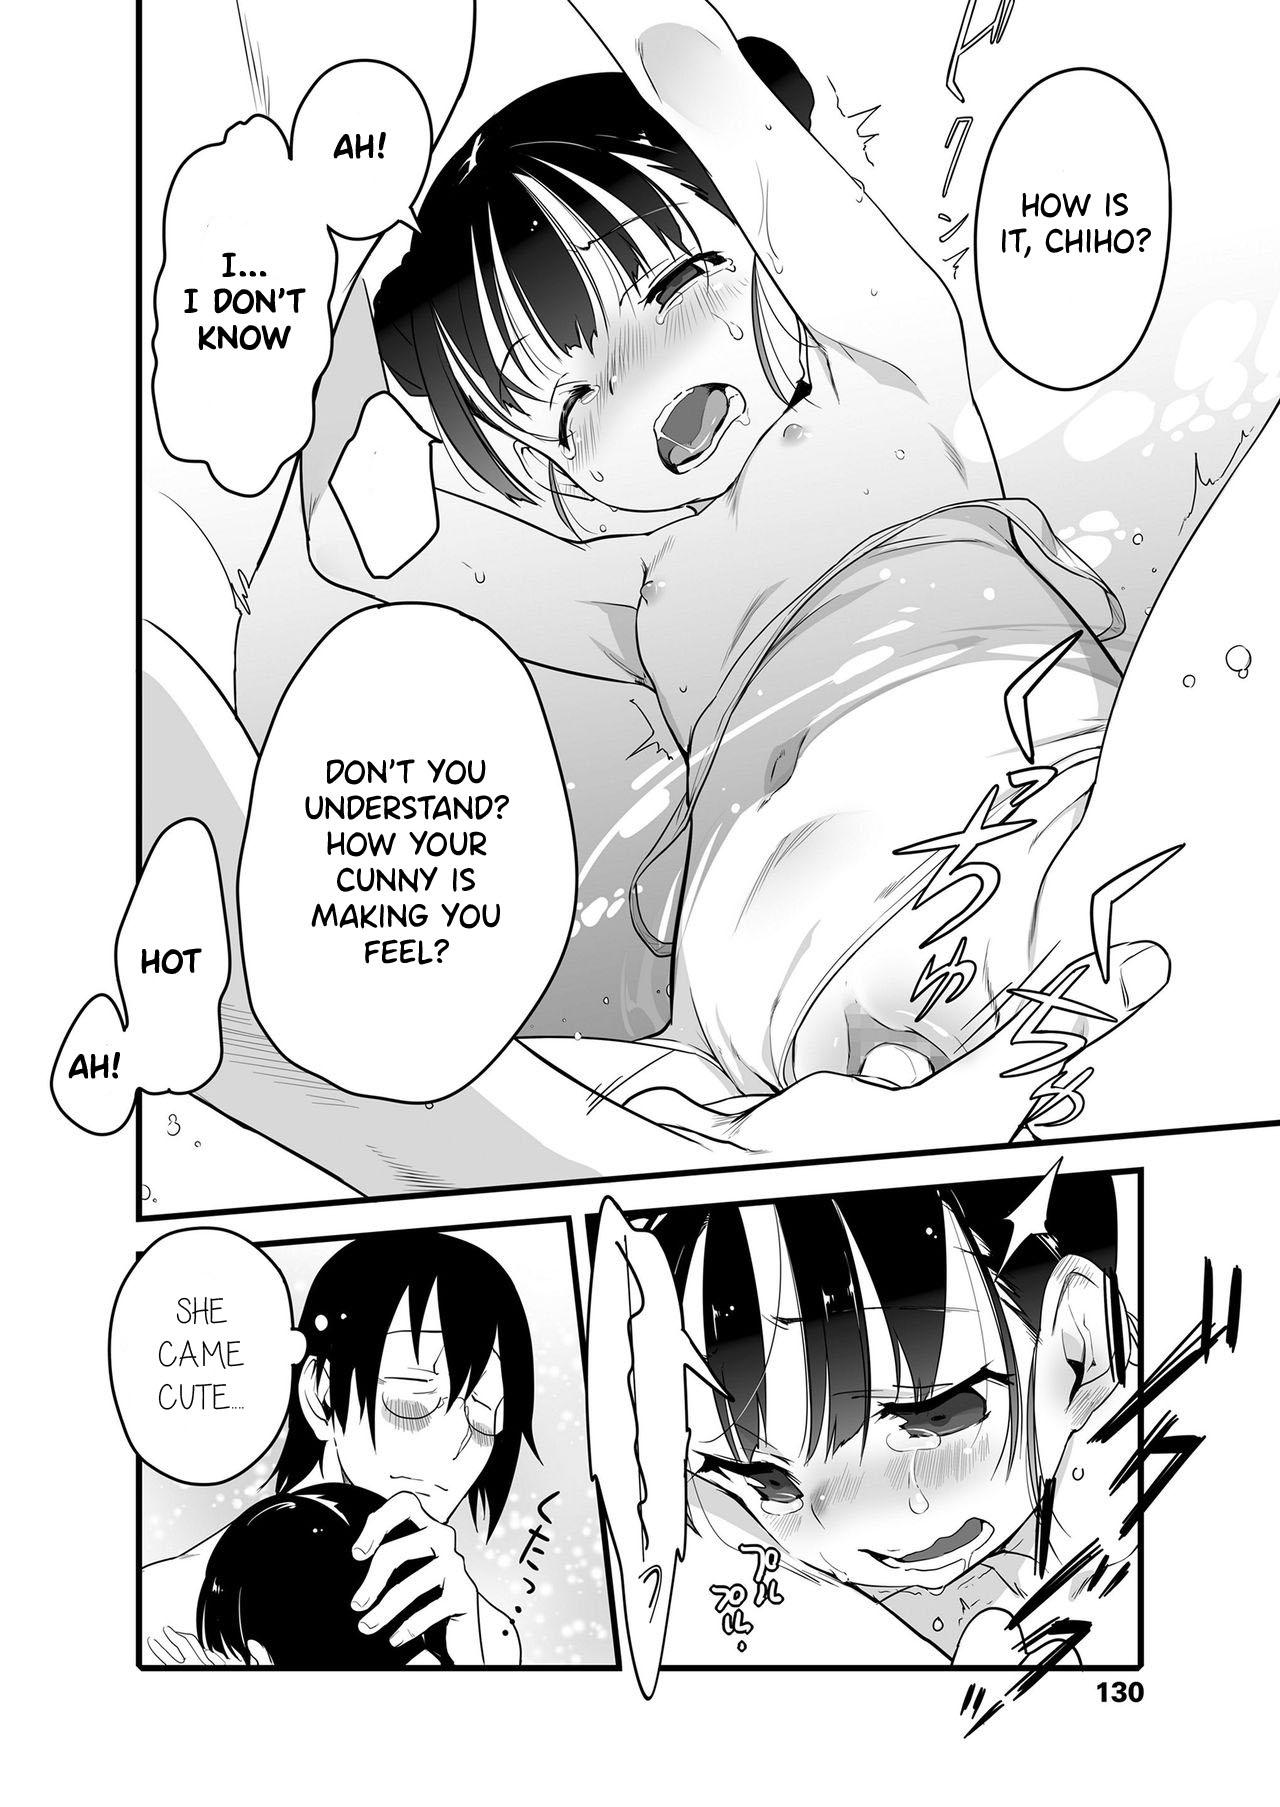 Women Sucking Uchiage Hanabi, Ane to Miruka? Imouto to Miruka? | Fireworks, Should we see it with the elder sister or the younger sister? Banging - Page 12